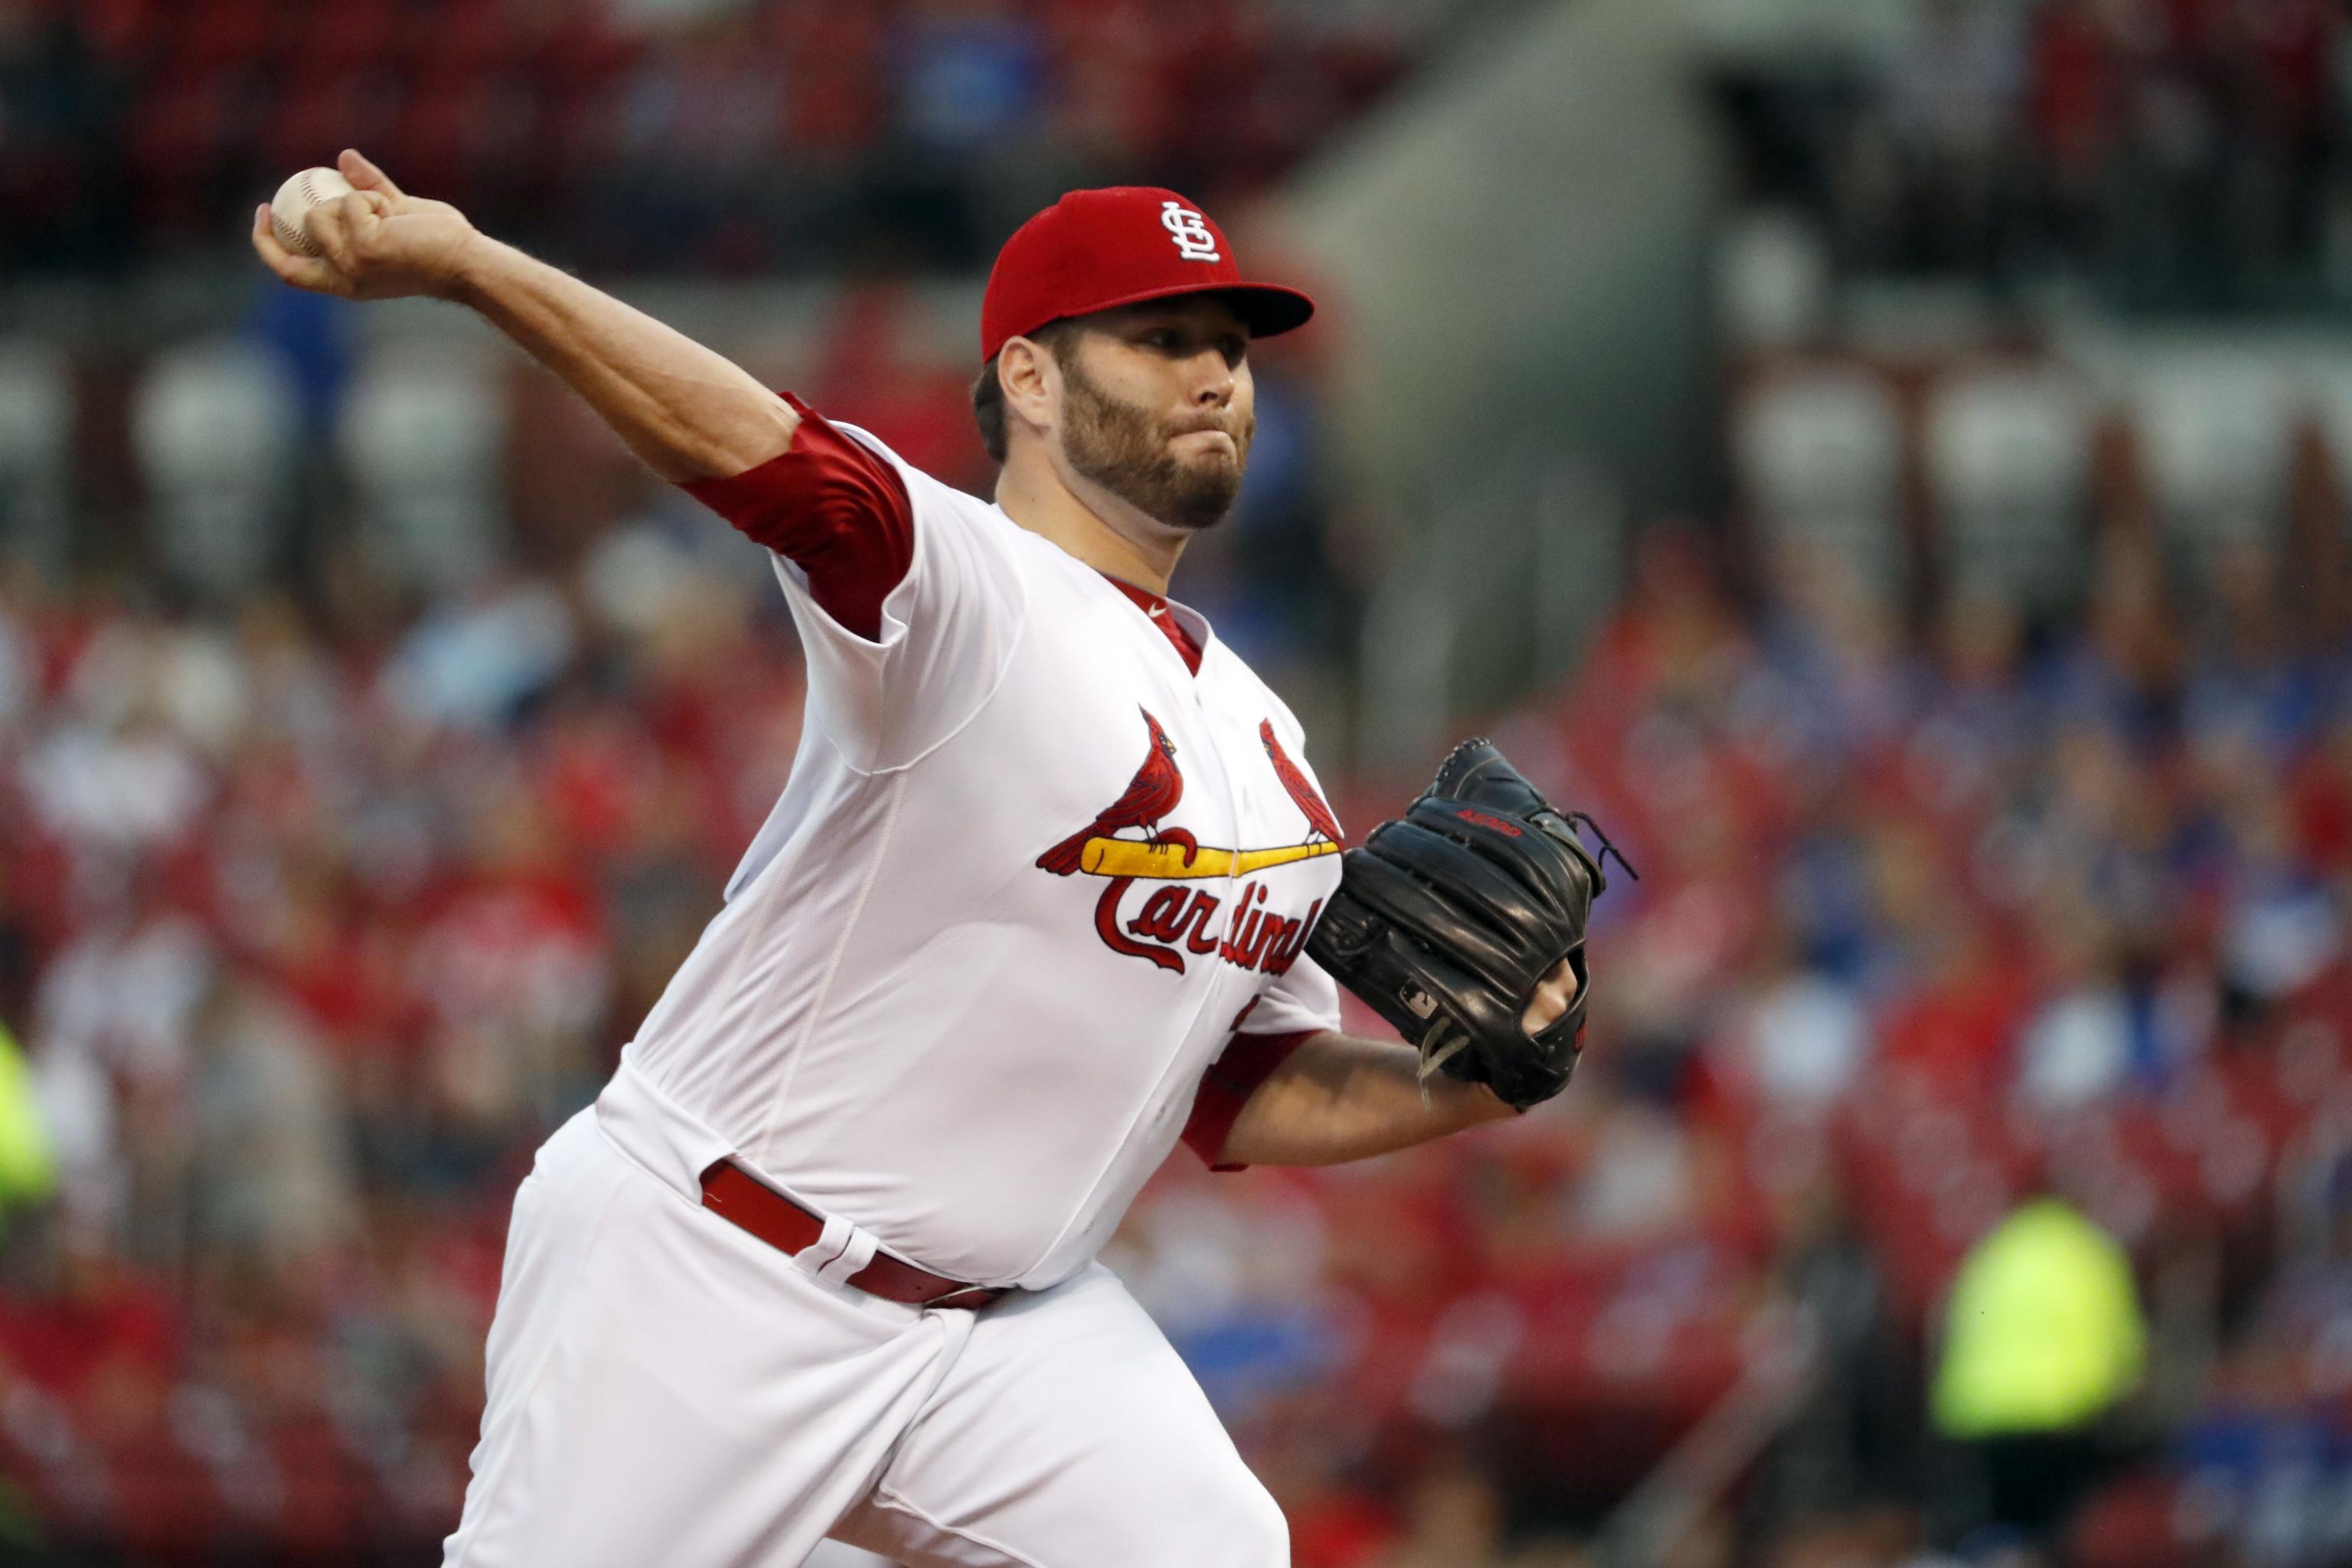 Twins reportedly offered Lance Lynn two years and $20 million